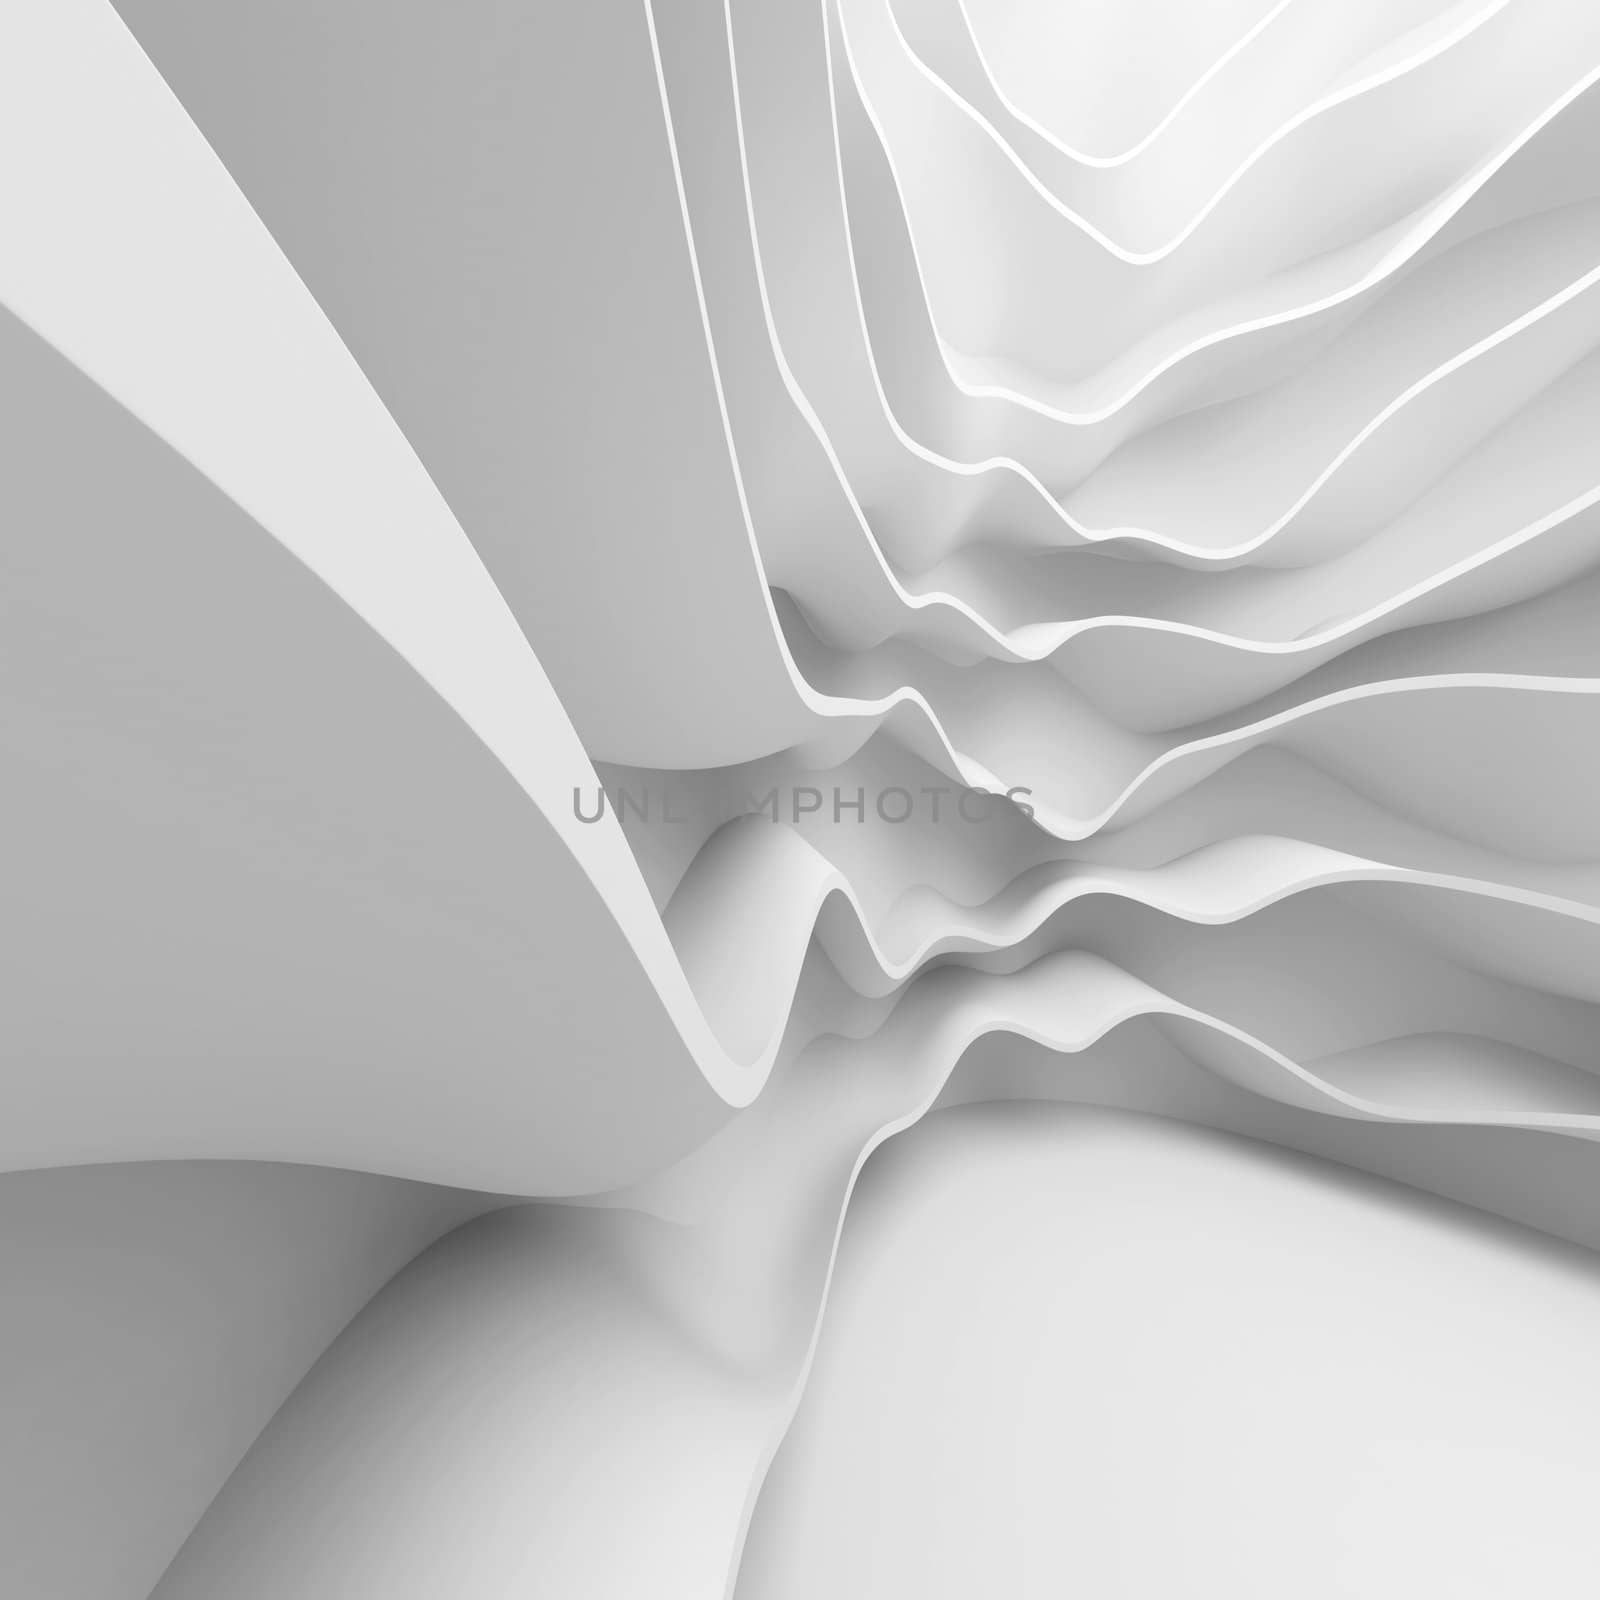 3d Illustration of White Abstract Construction